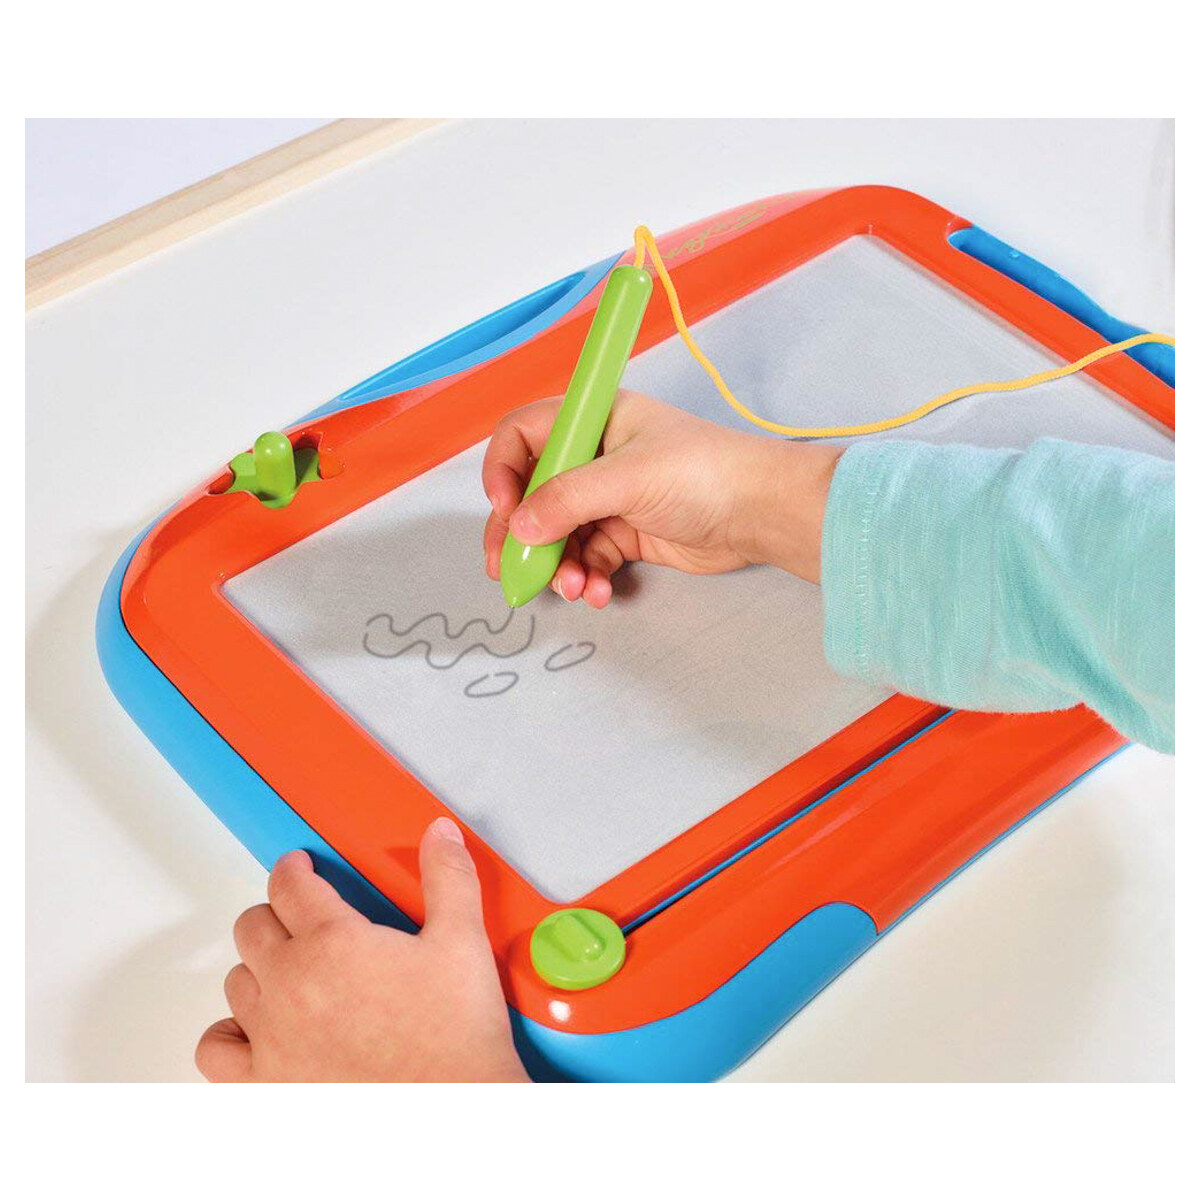 TOMY Megasketcher Mini, messfree drawing board with easy